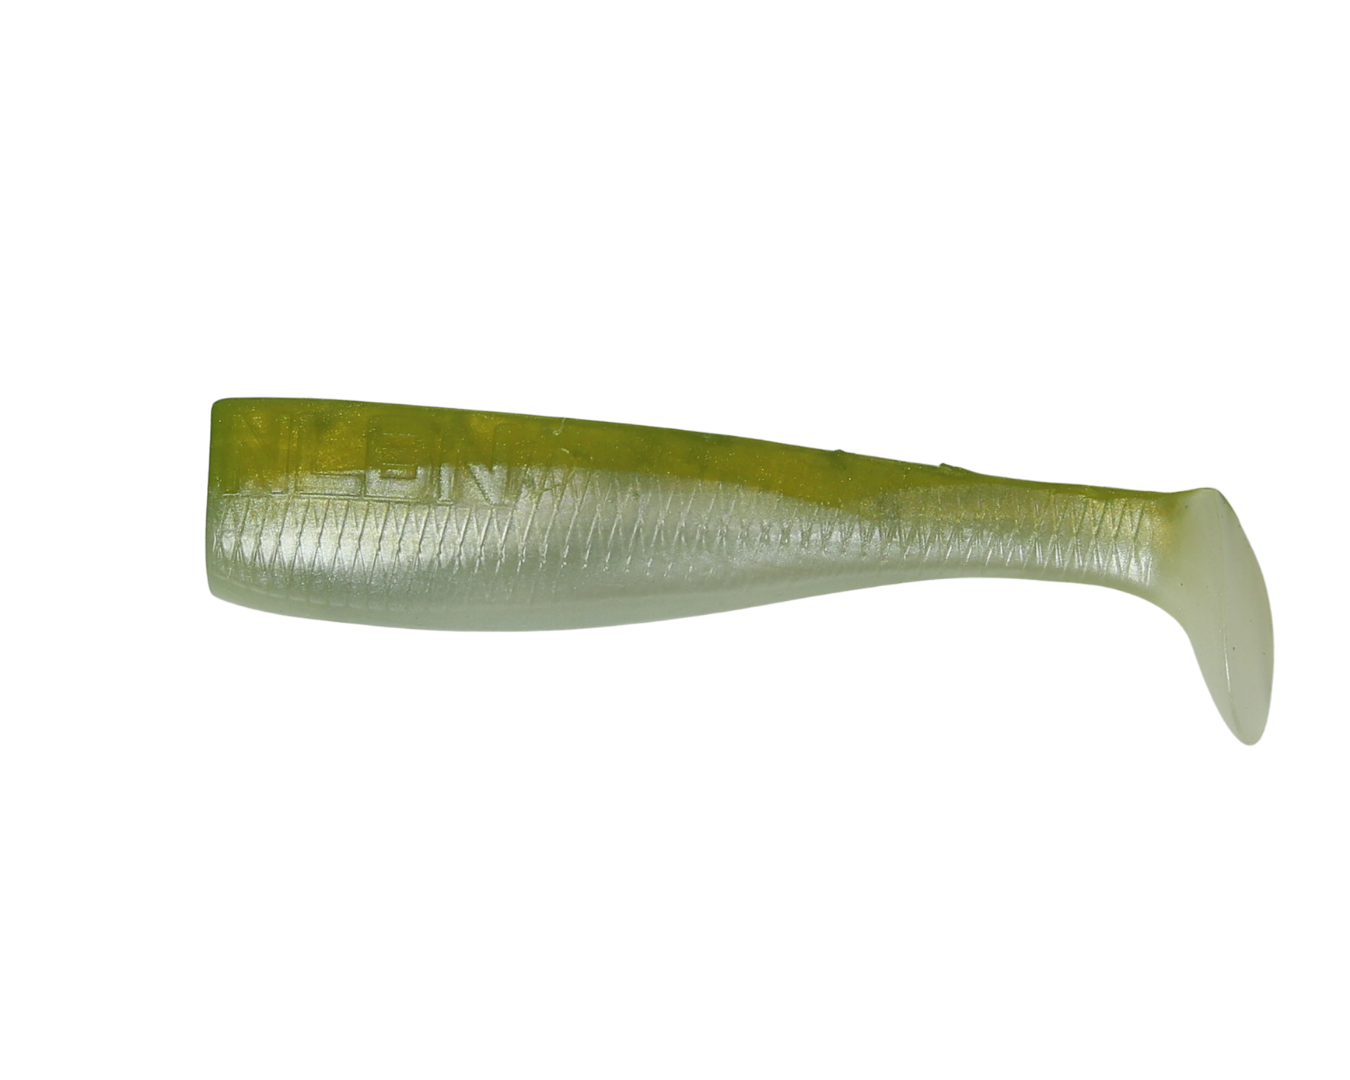 No Live Bait Needed 5 Paddle Tails – Tackle World